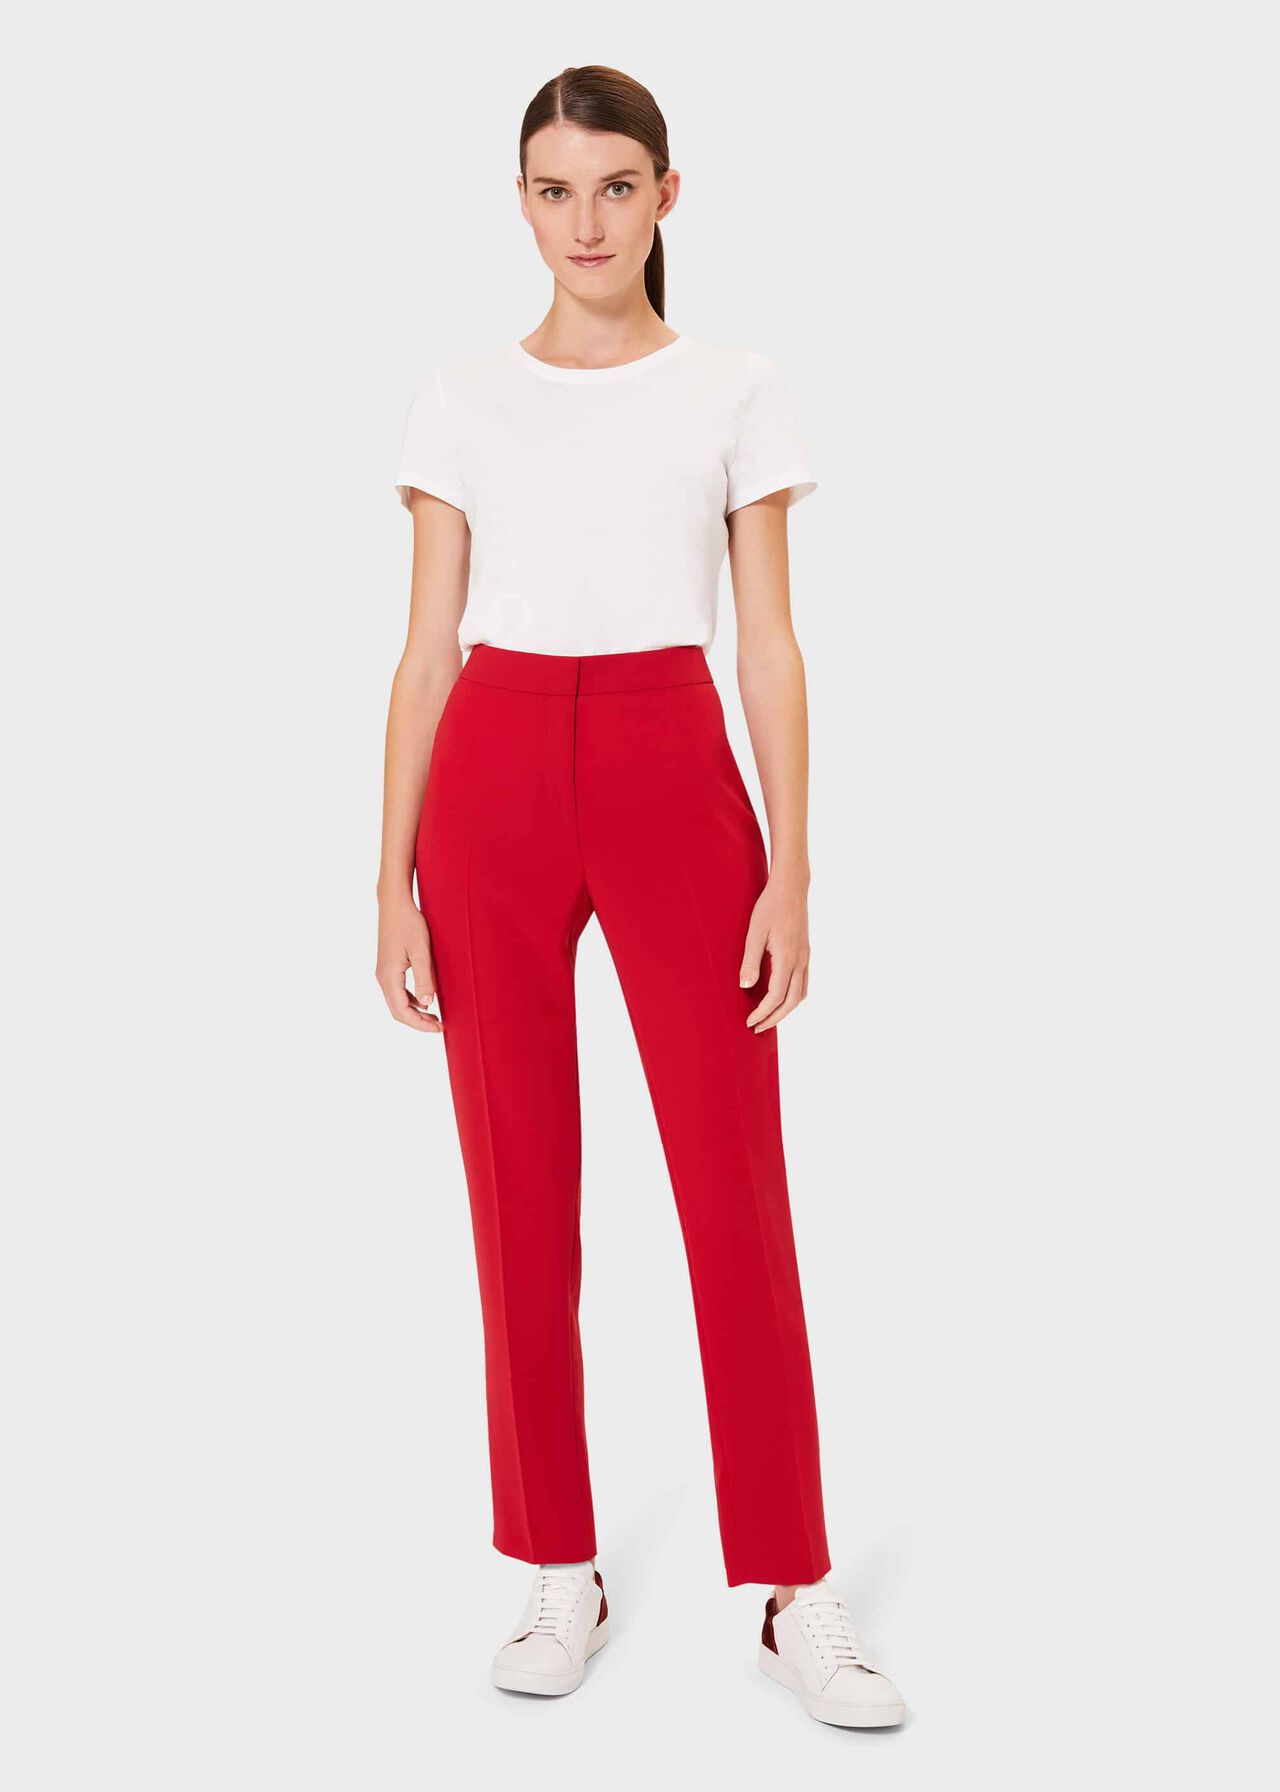 Zinnia Tapered Pants, Red, hi-res